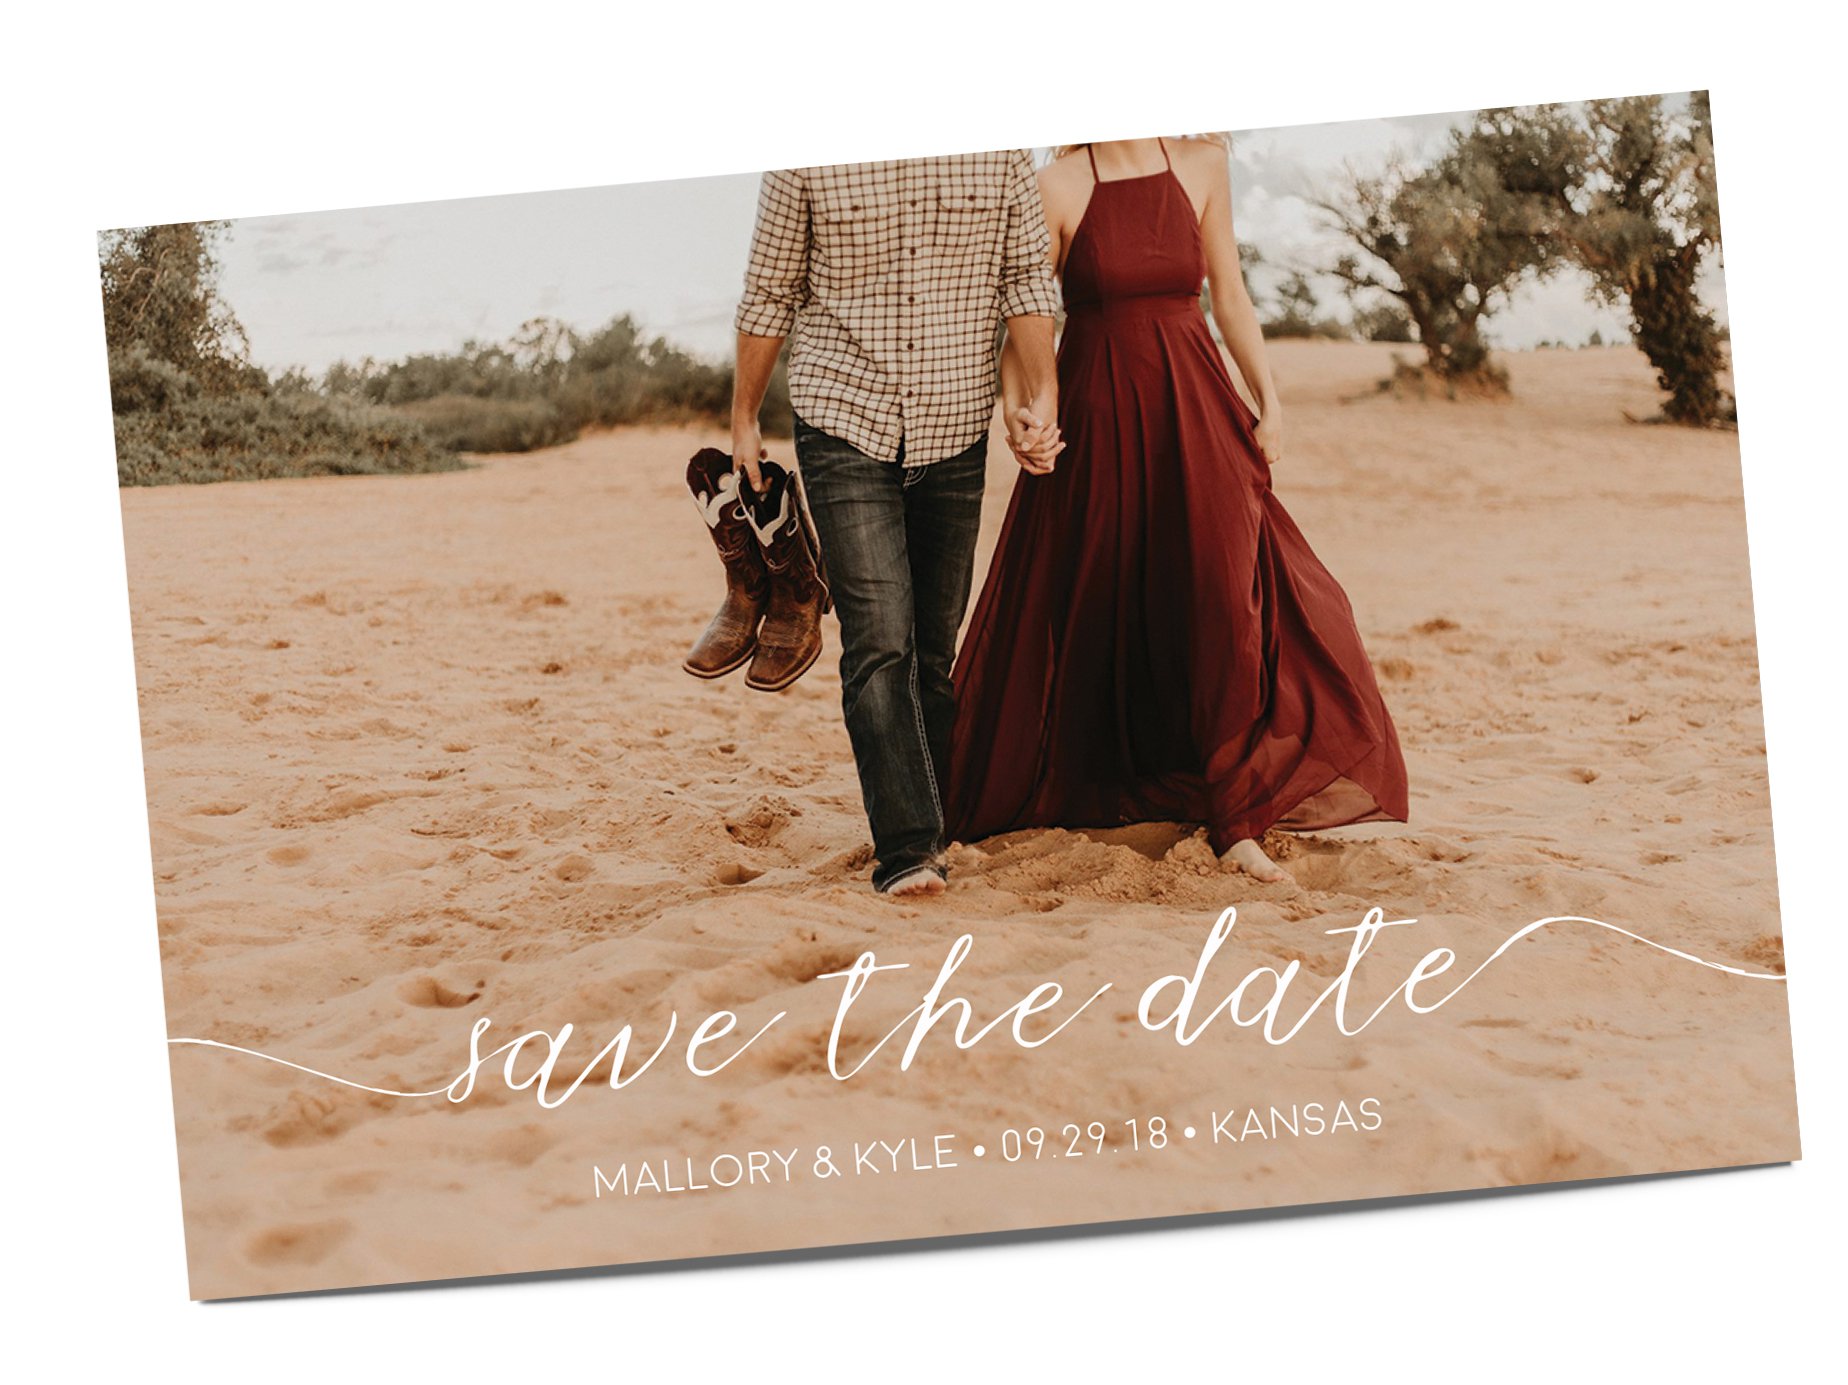 Save the date postcard printed by Emporia State's University Copy Center